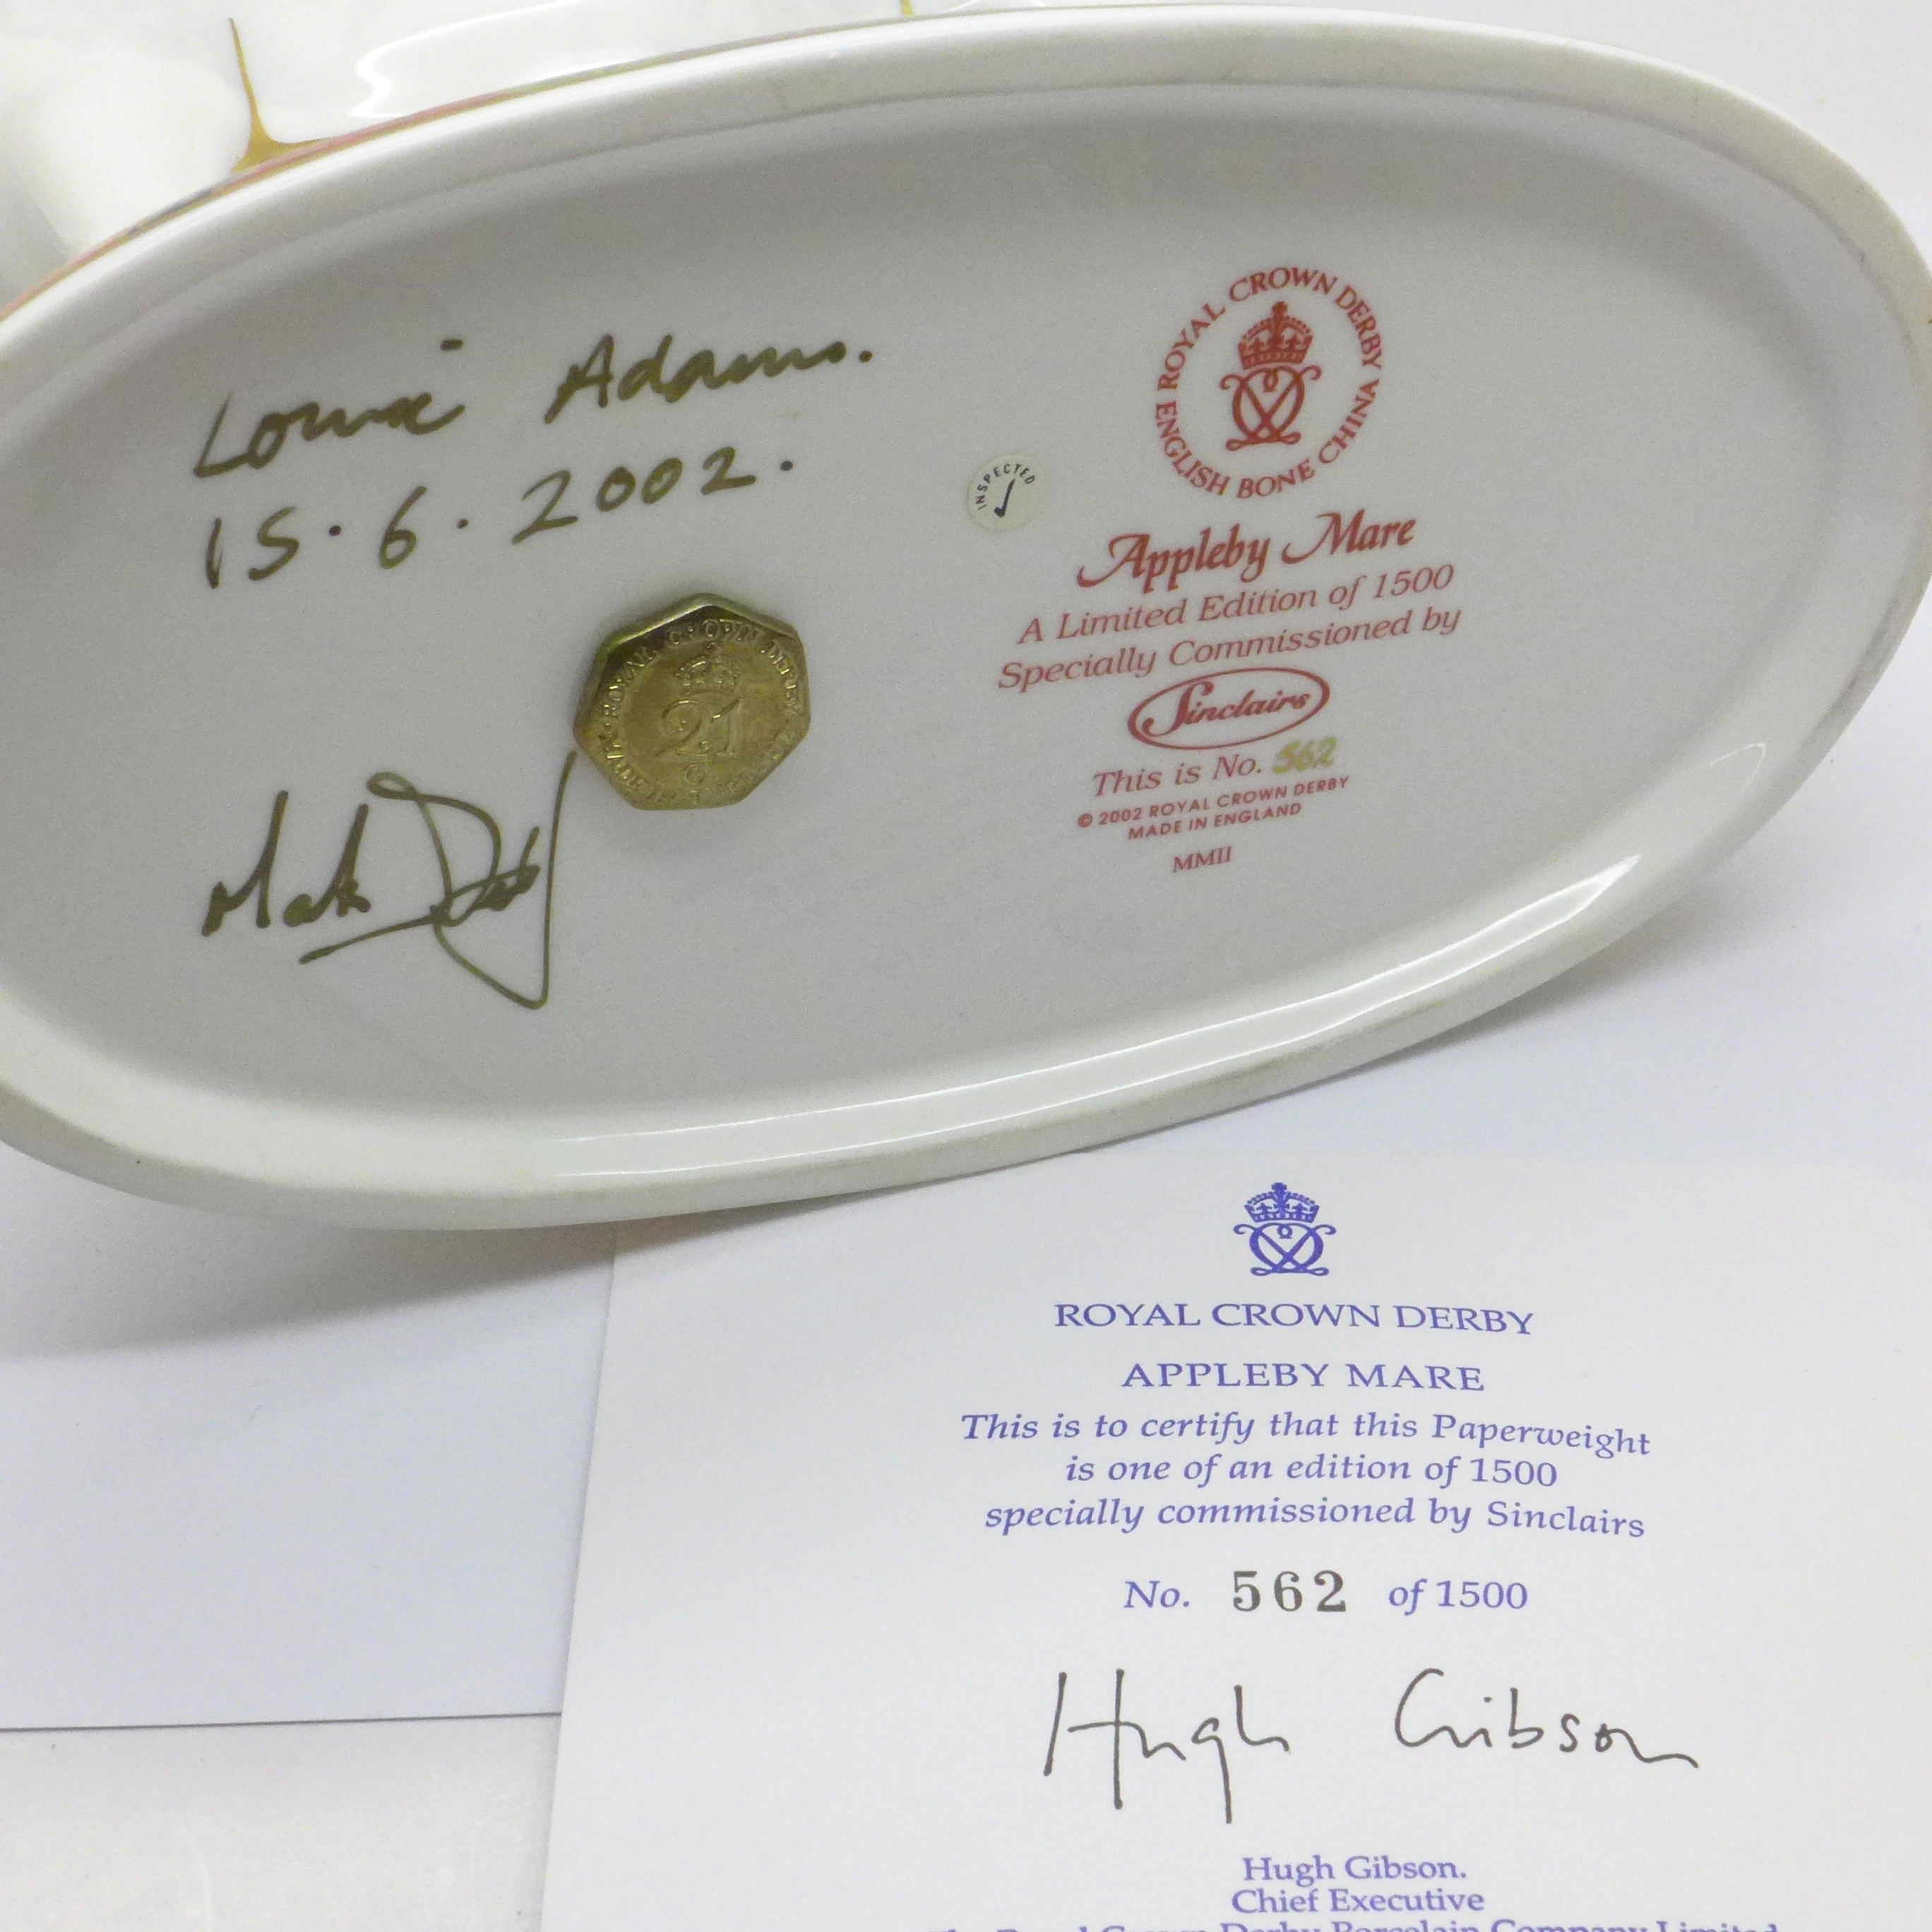 A Royal Crown Derby paperweight, Sinclairs Appleby Mare, 562 of 1500, boxed, with certificate and - Image 5 of 7